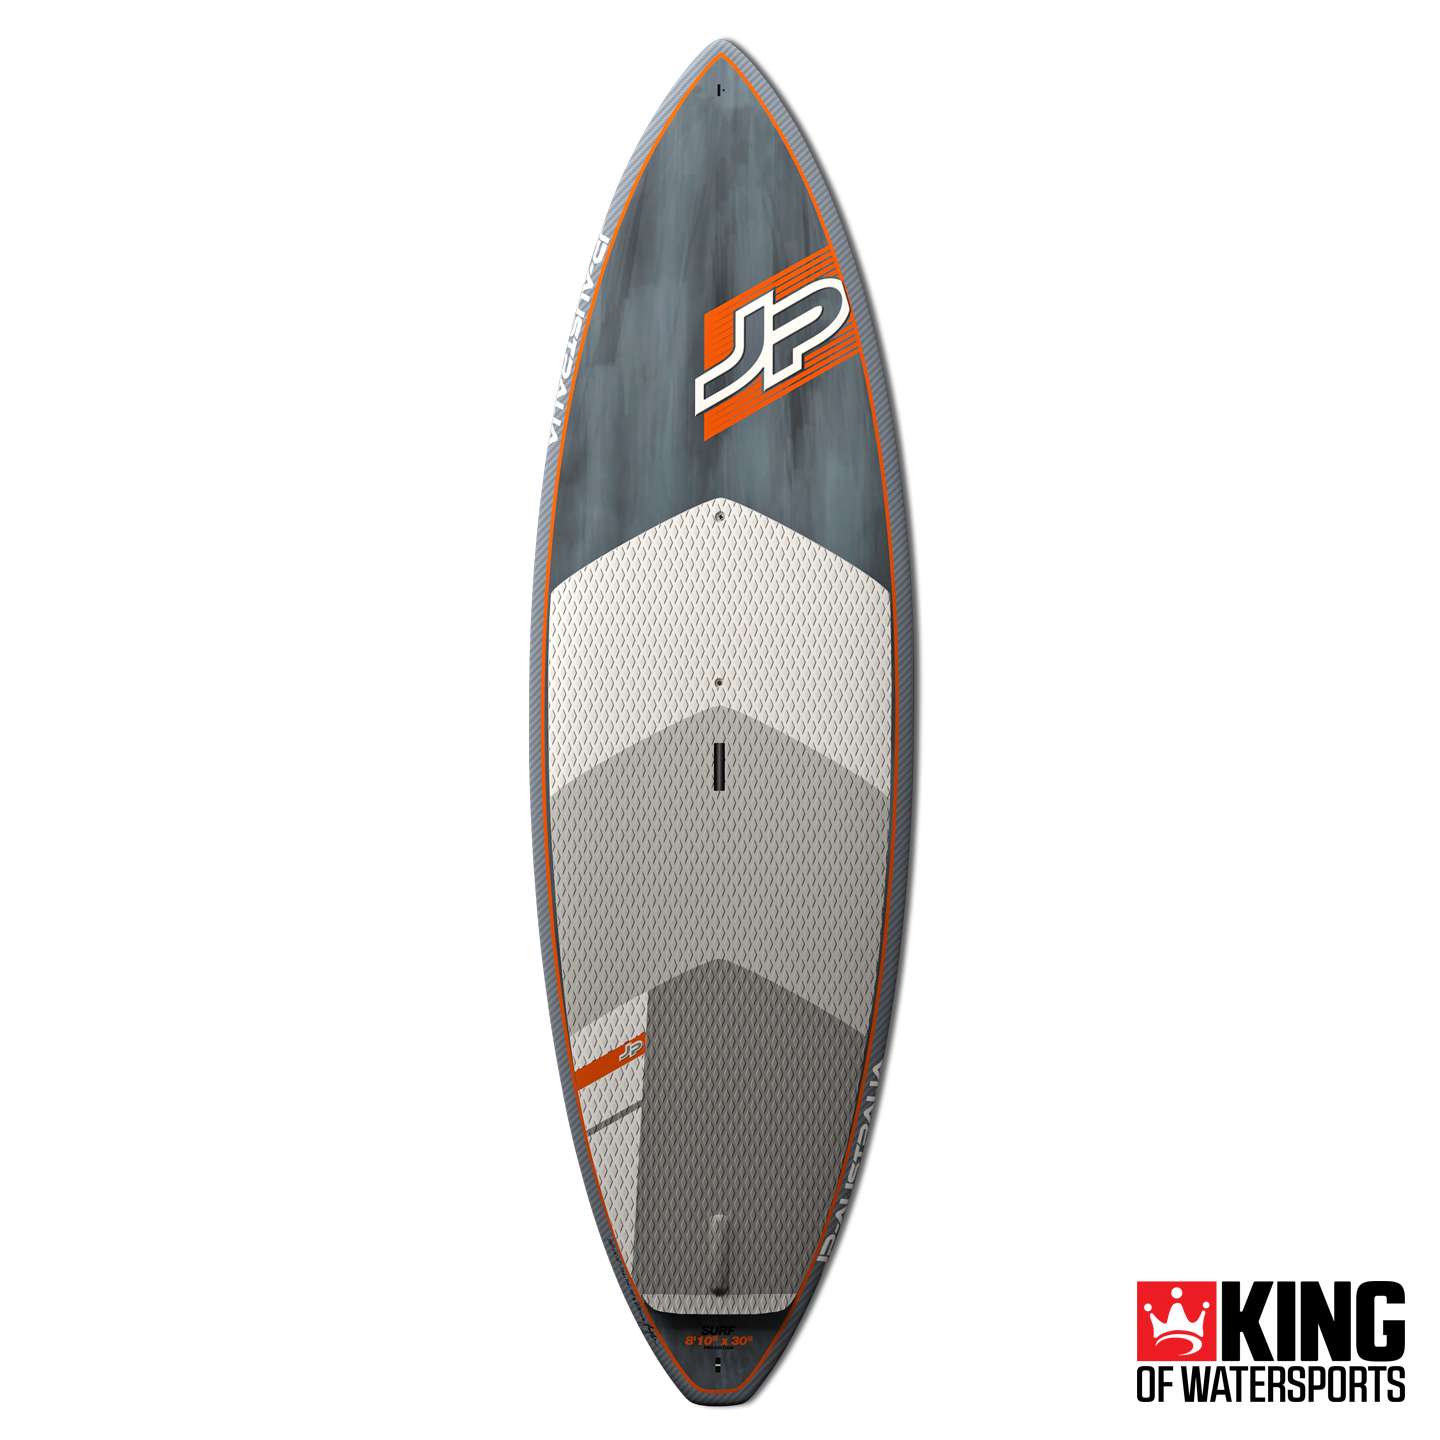 Surf - JP Australia - Top to Bottom Perfection in SUP Surfing